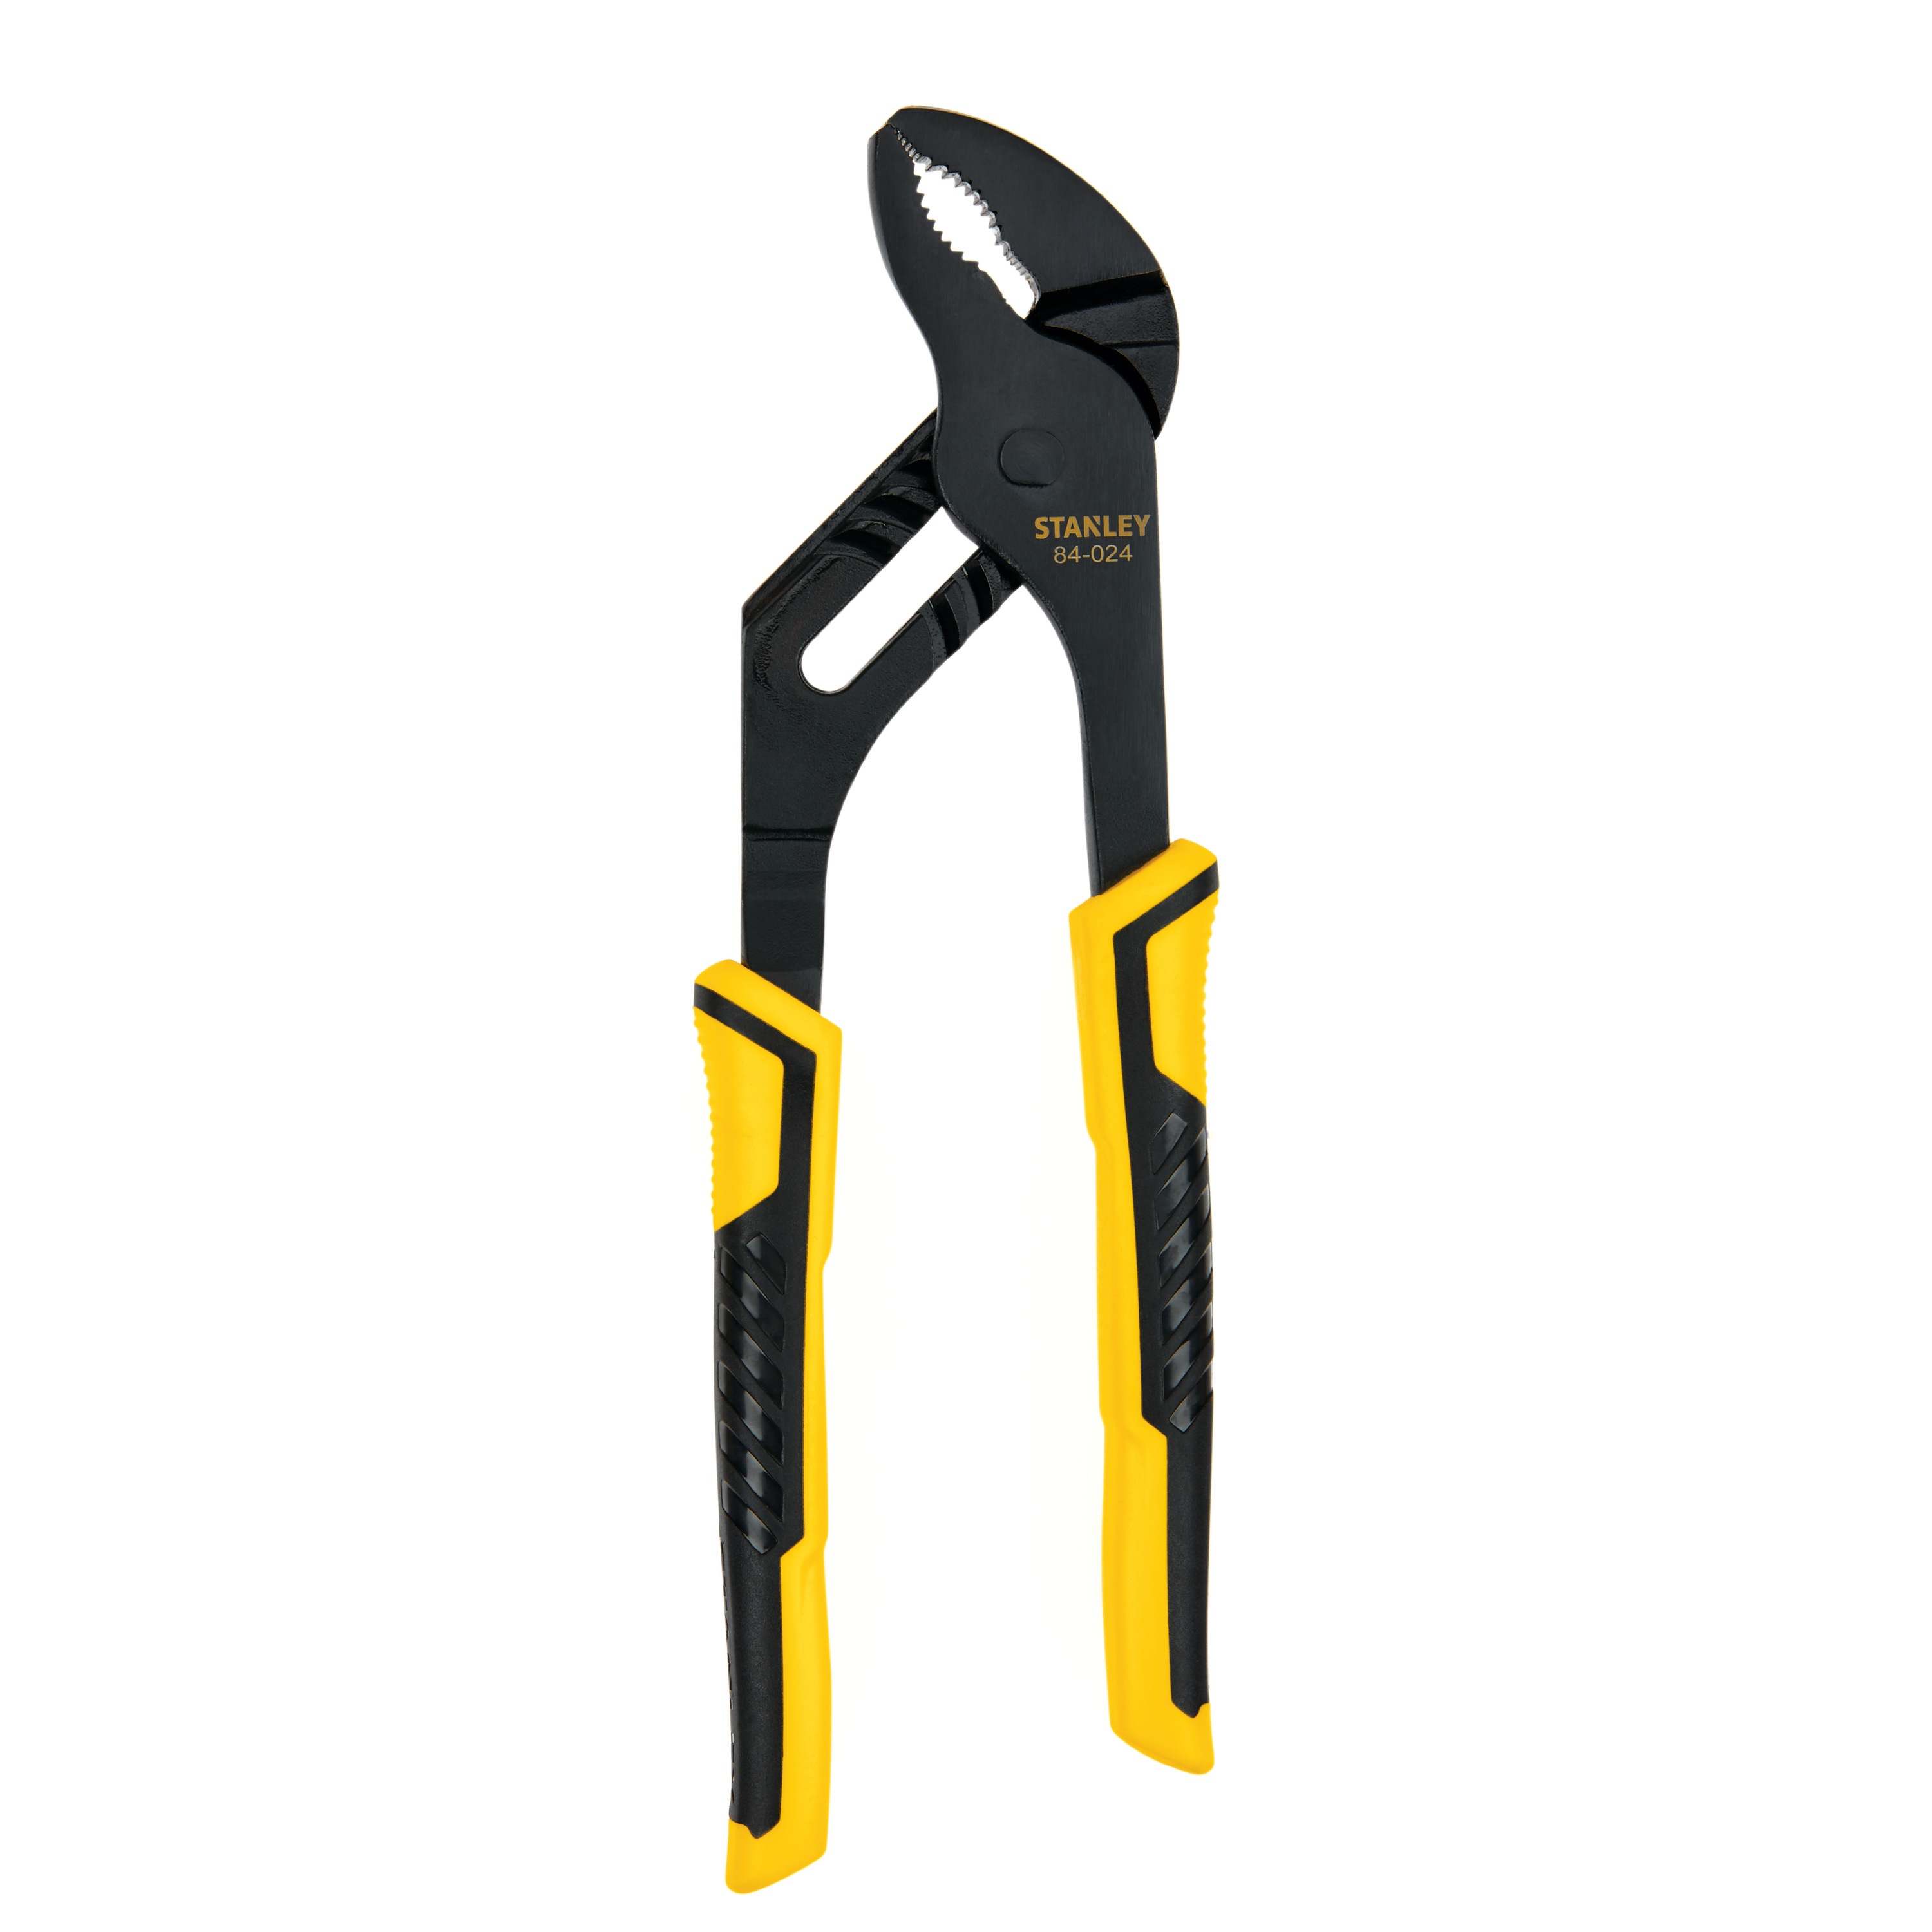 Stanley Tools - 10 in Groove Joint Pliers - 84-024